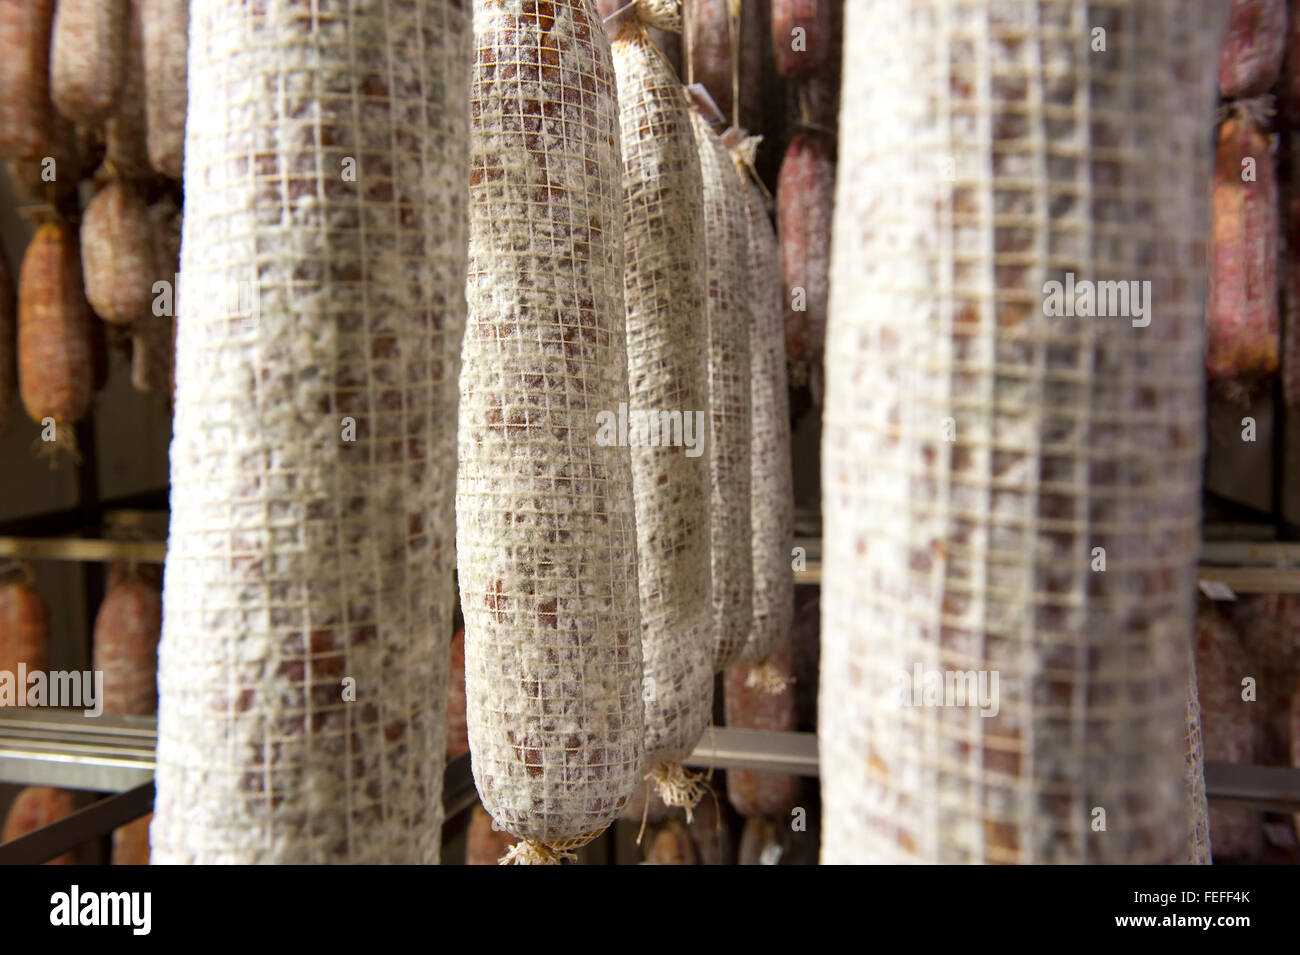 Close up on rows of aging spicy Italian salami sausages hanging in a butchery during the curing and drying process Stock Photo